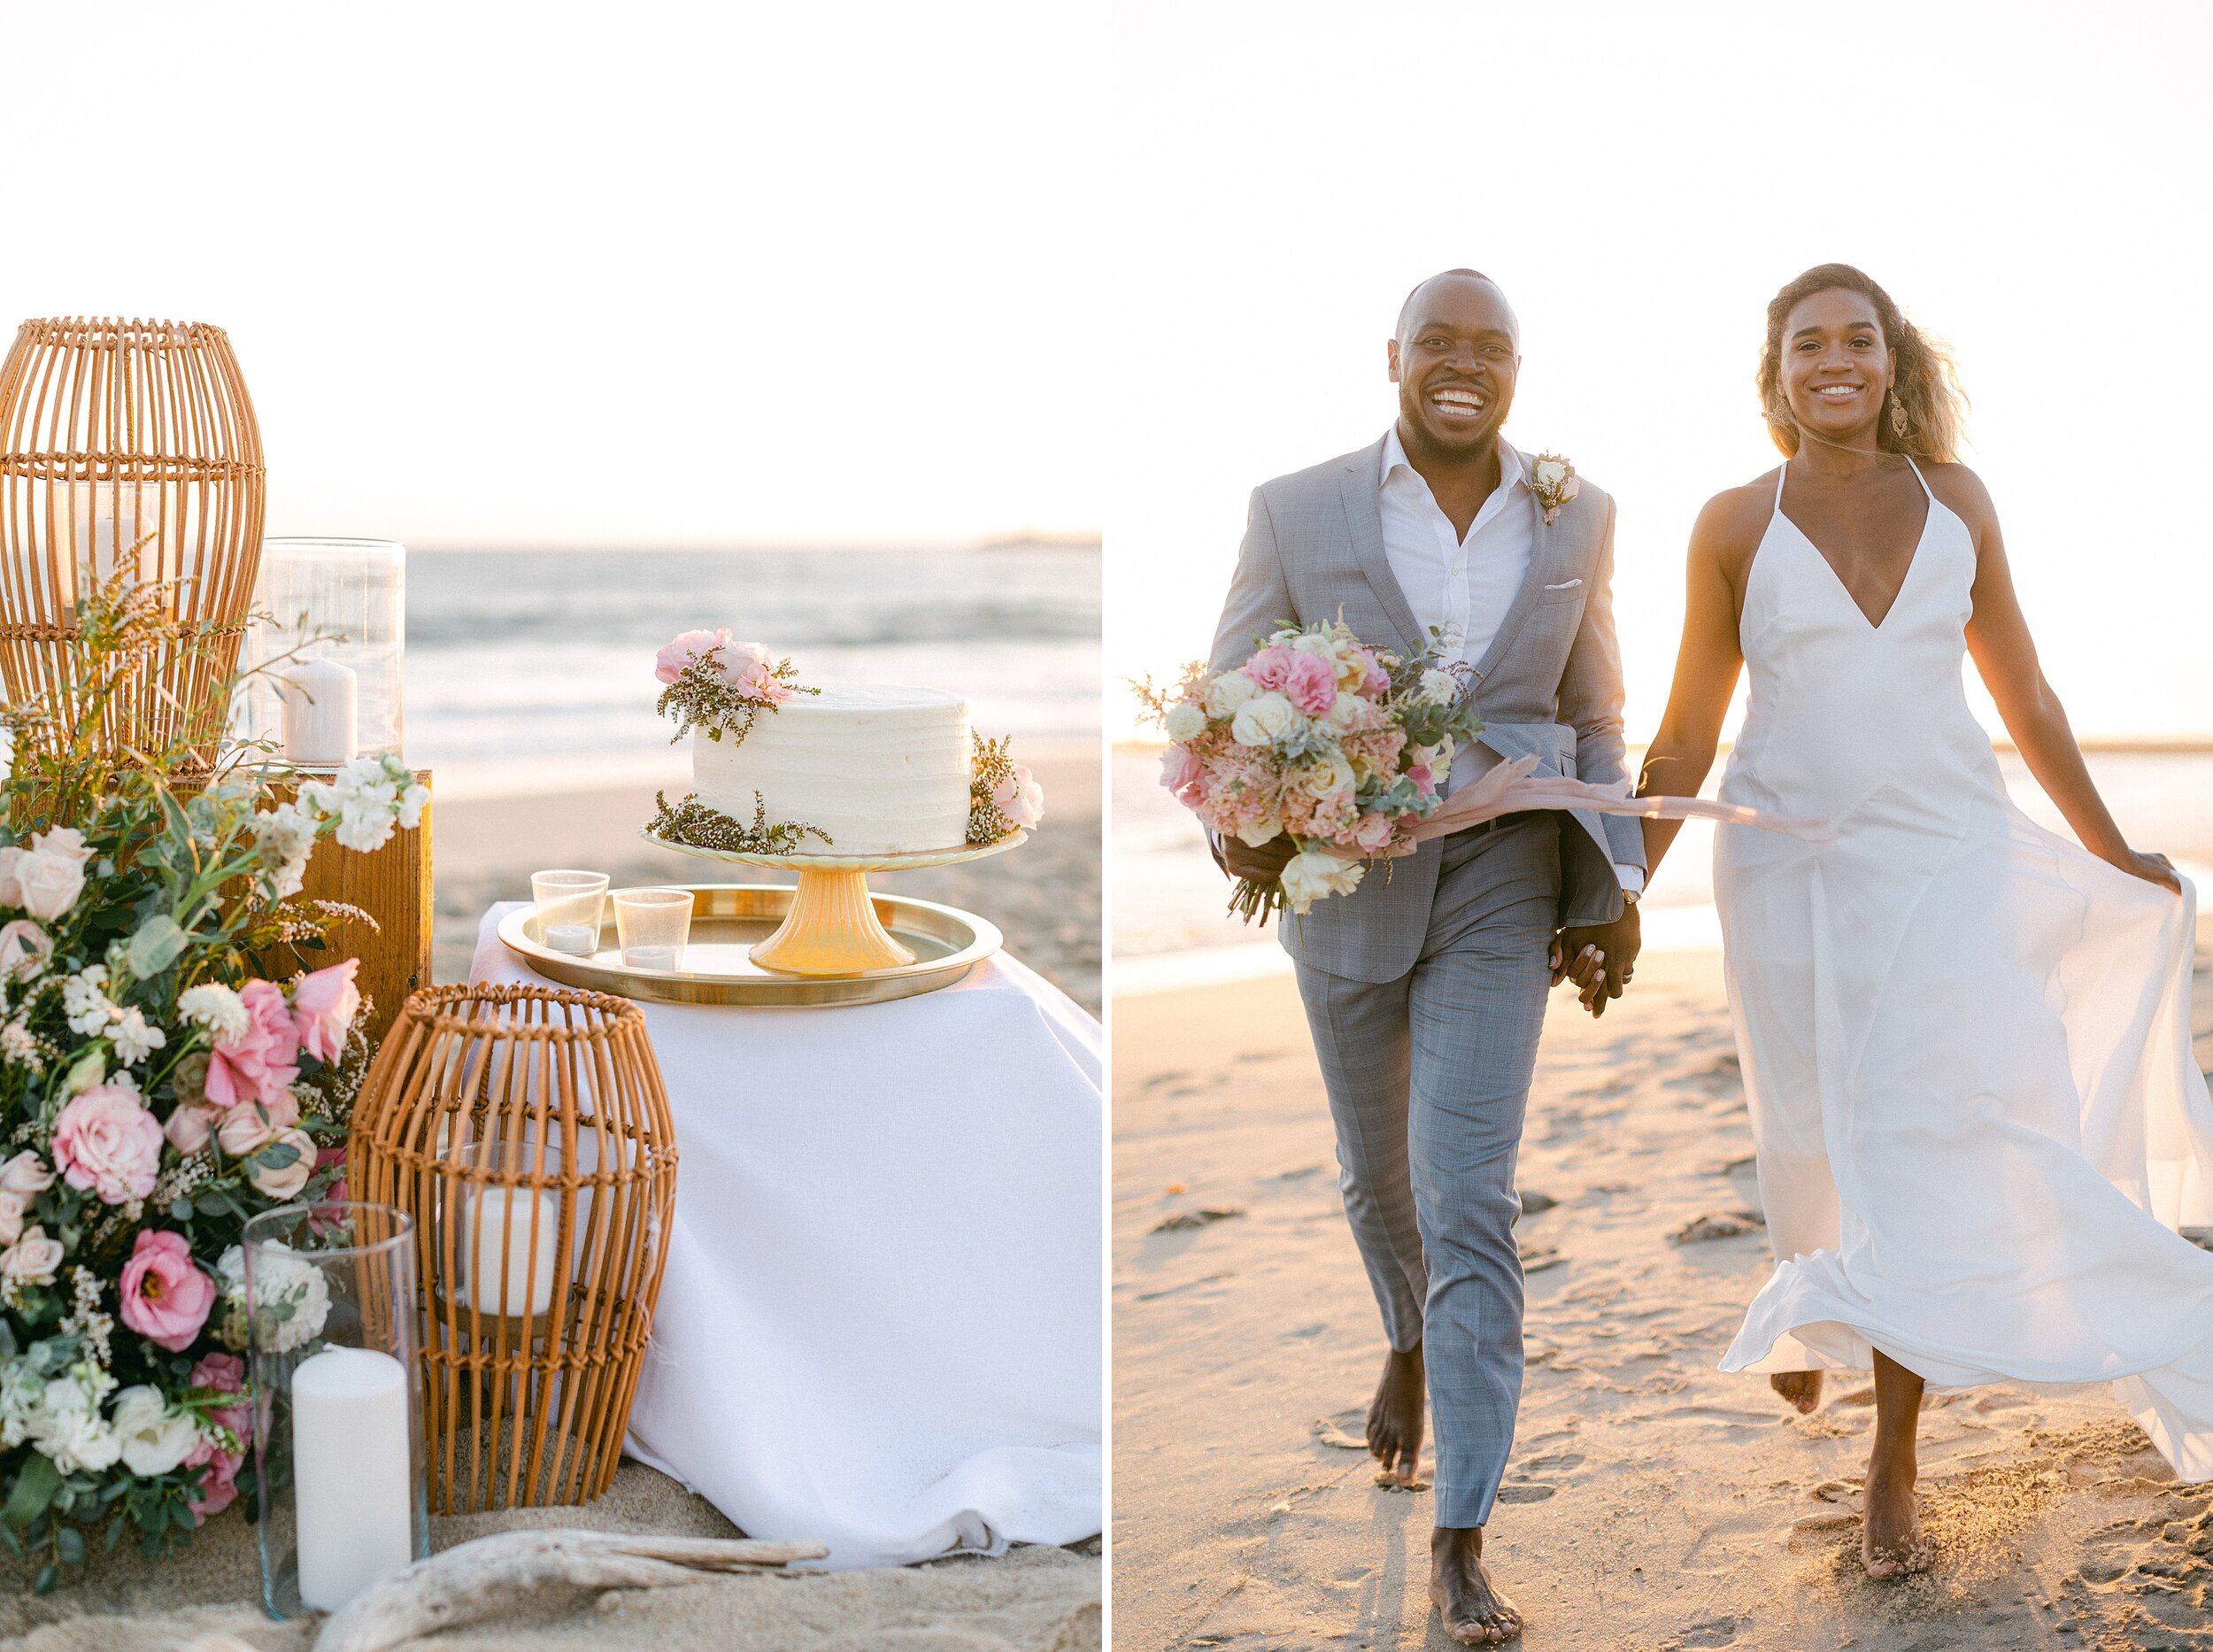 Bride and groom celebrate by holding hands and running off into the sunset following their dreamy beach elopement